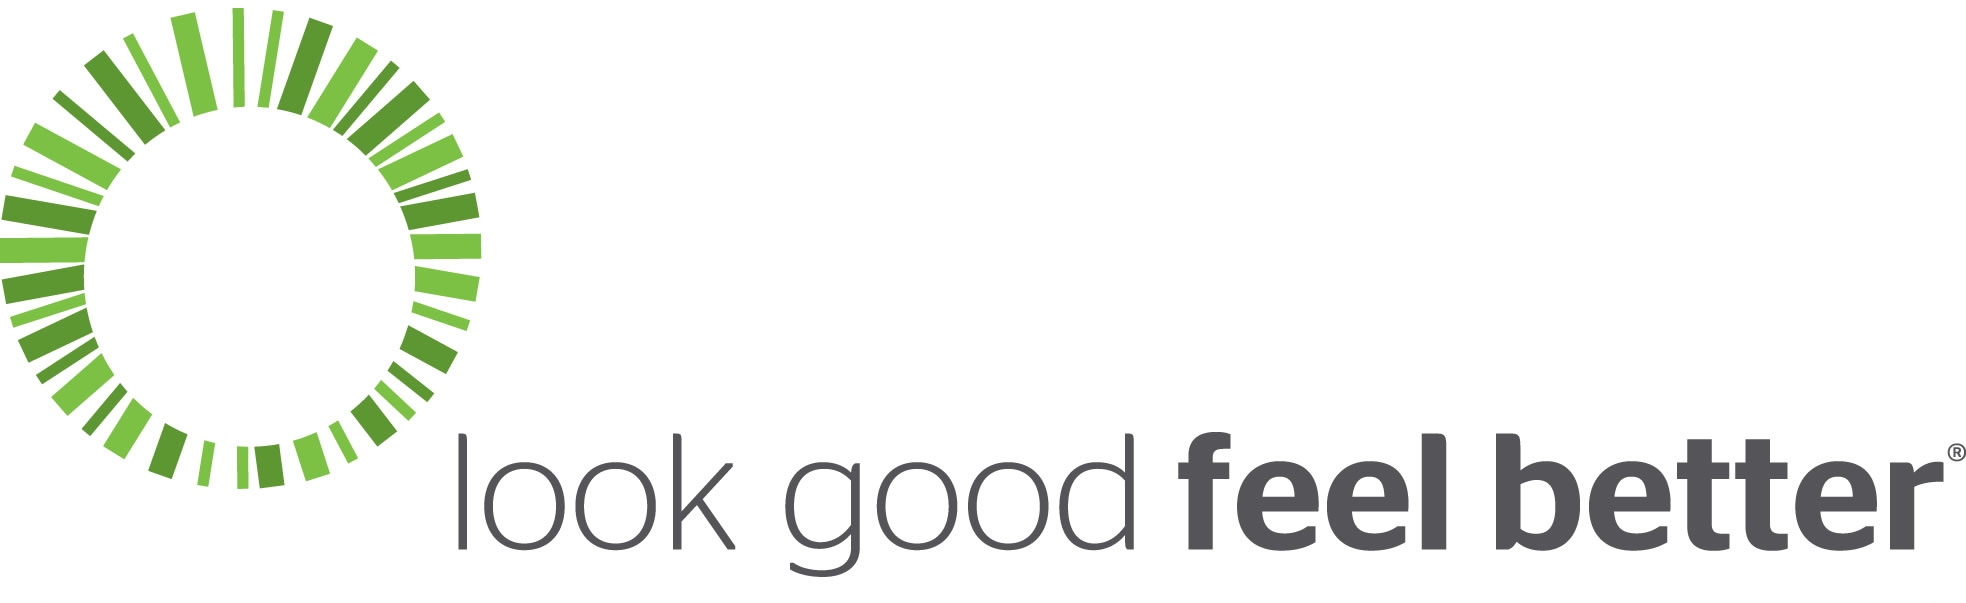 Look Good Feel Better for Teens | Helping Teens With Cancer » Feed